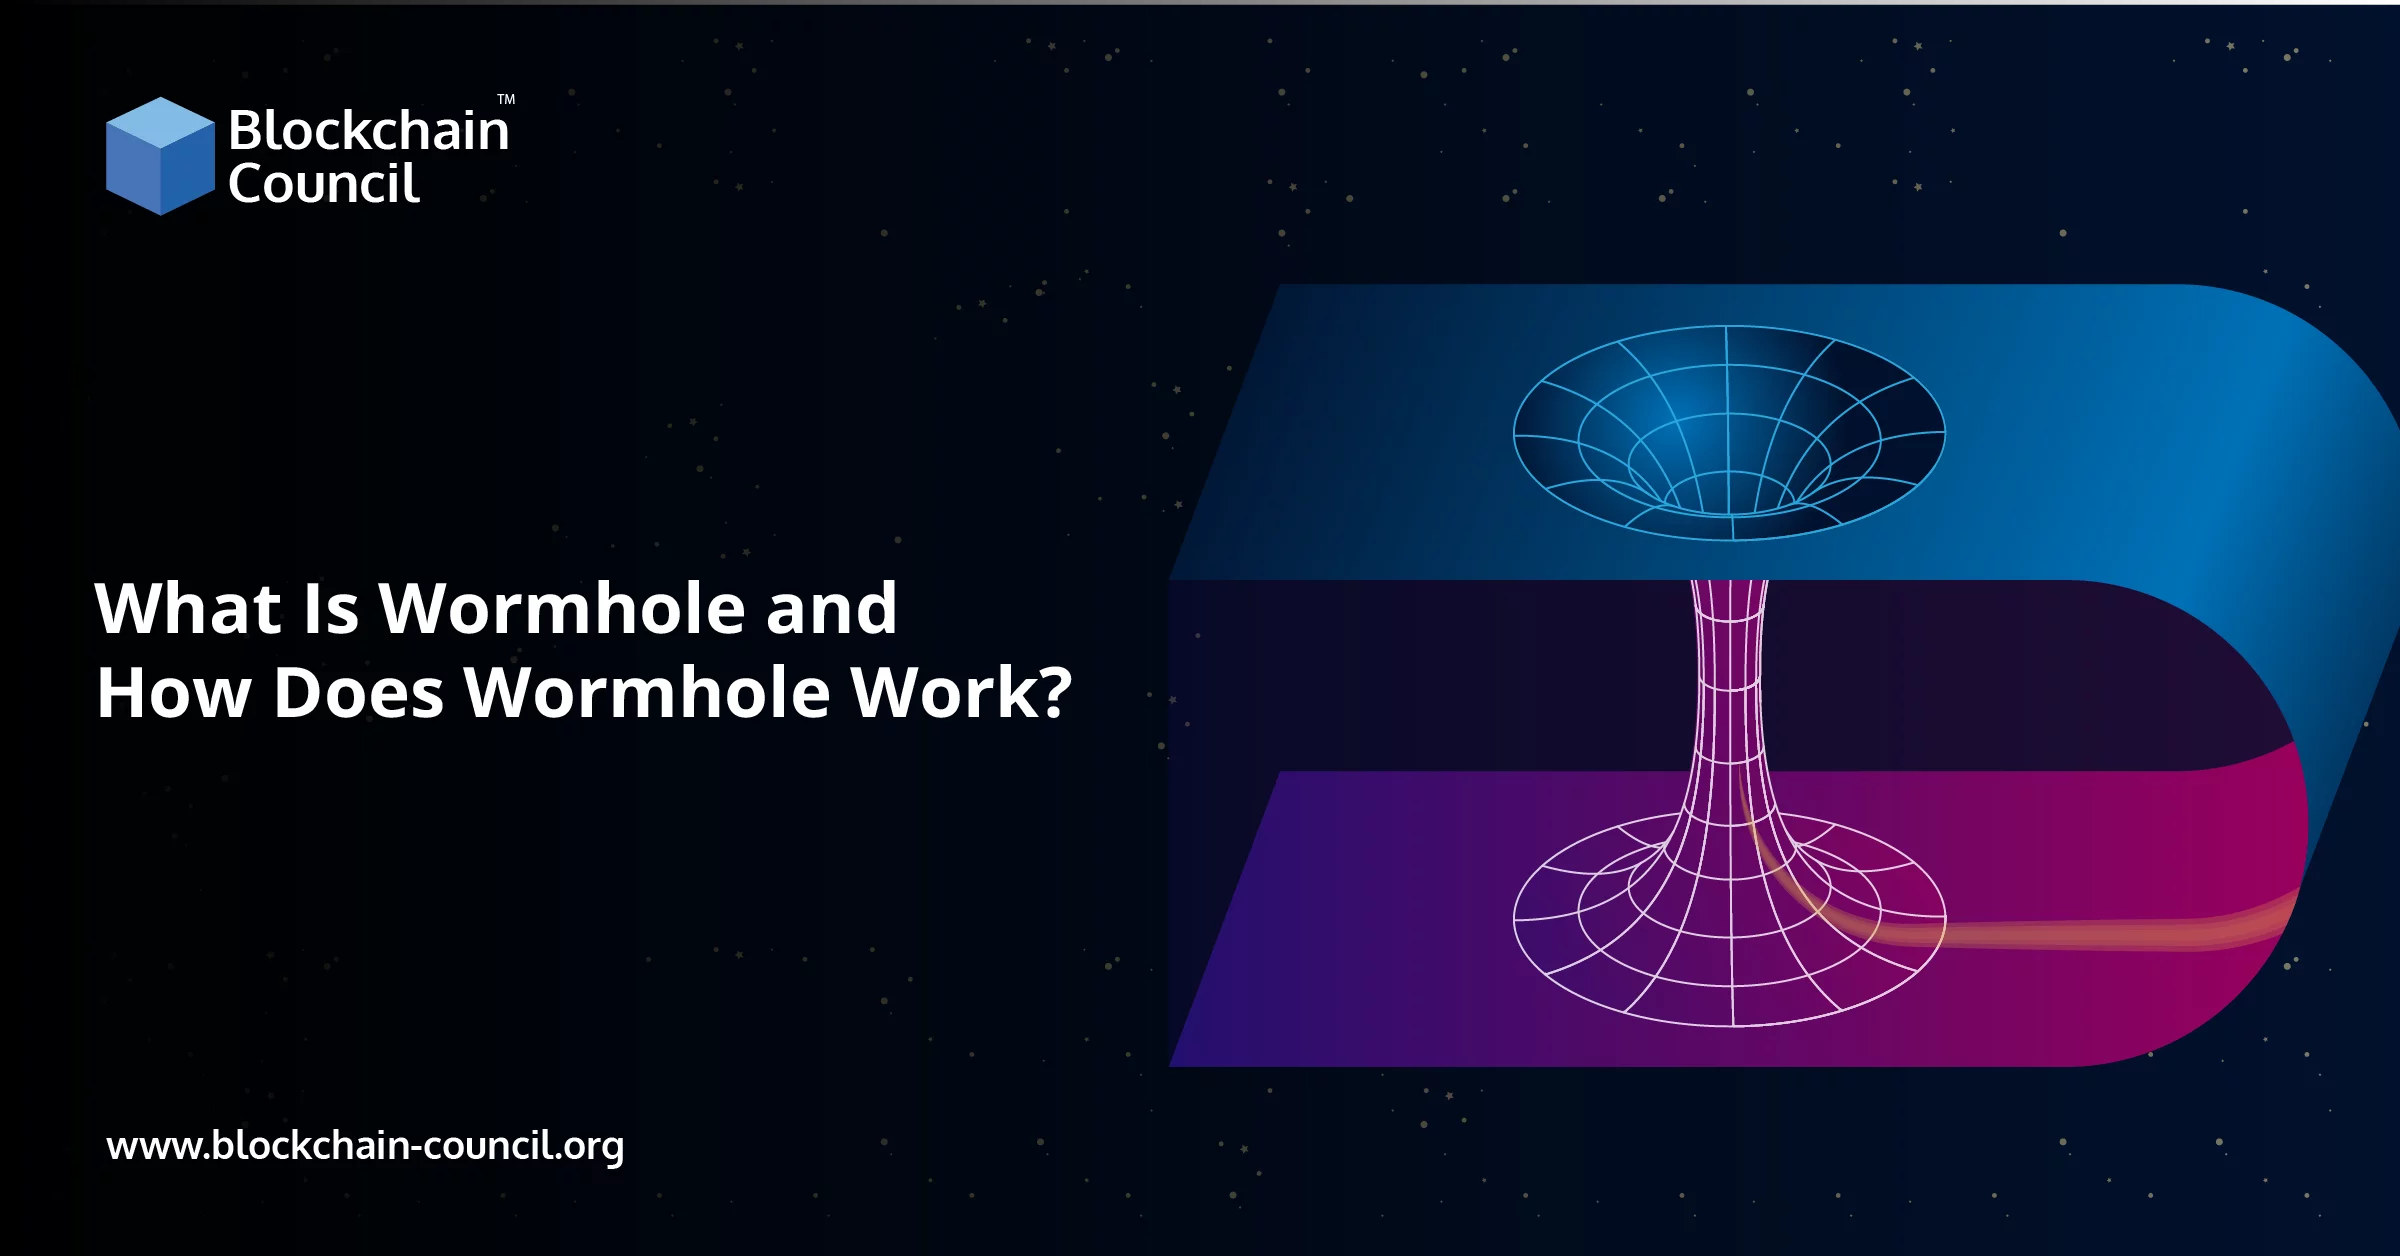 What Is Wormhole and How Does Wormhole Work